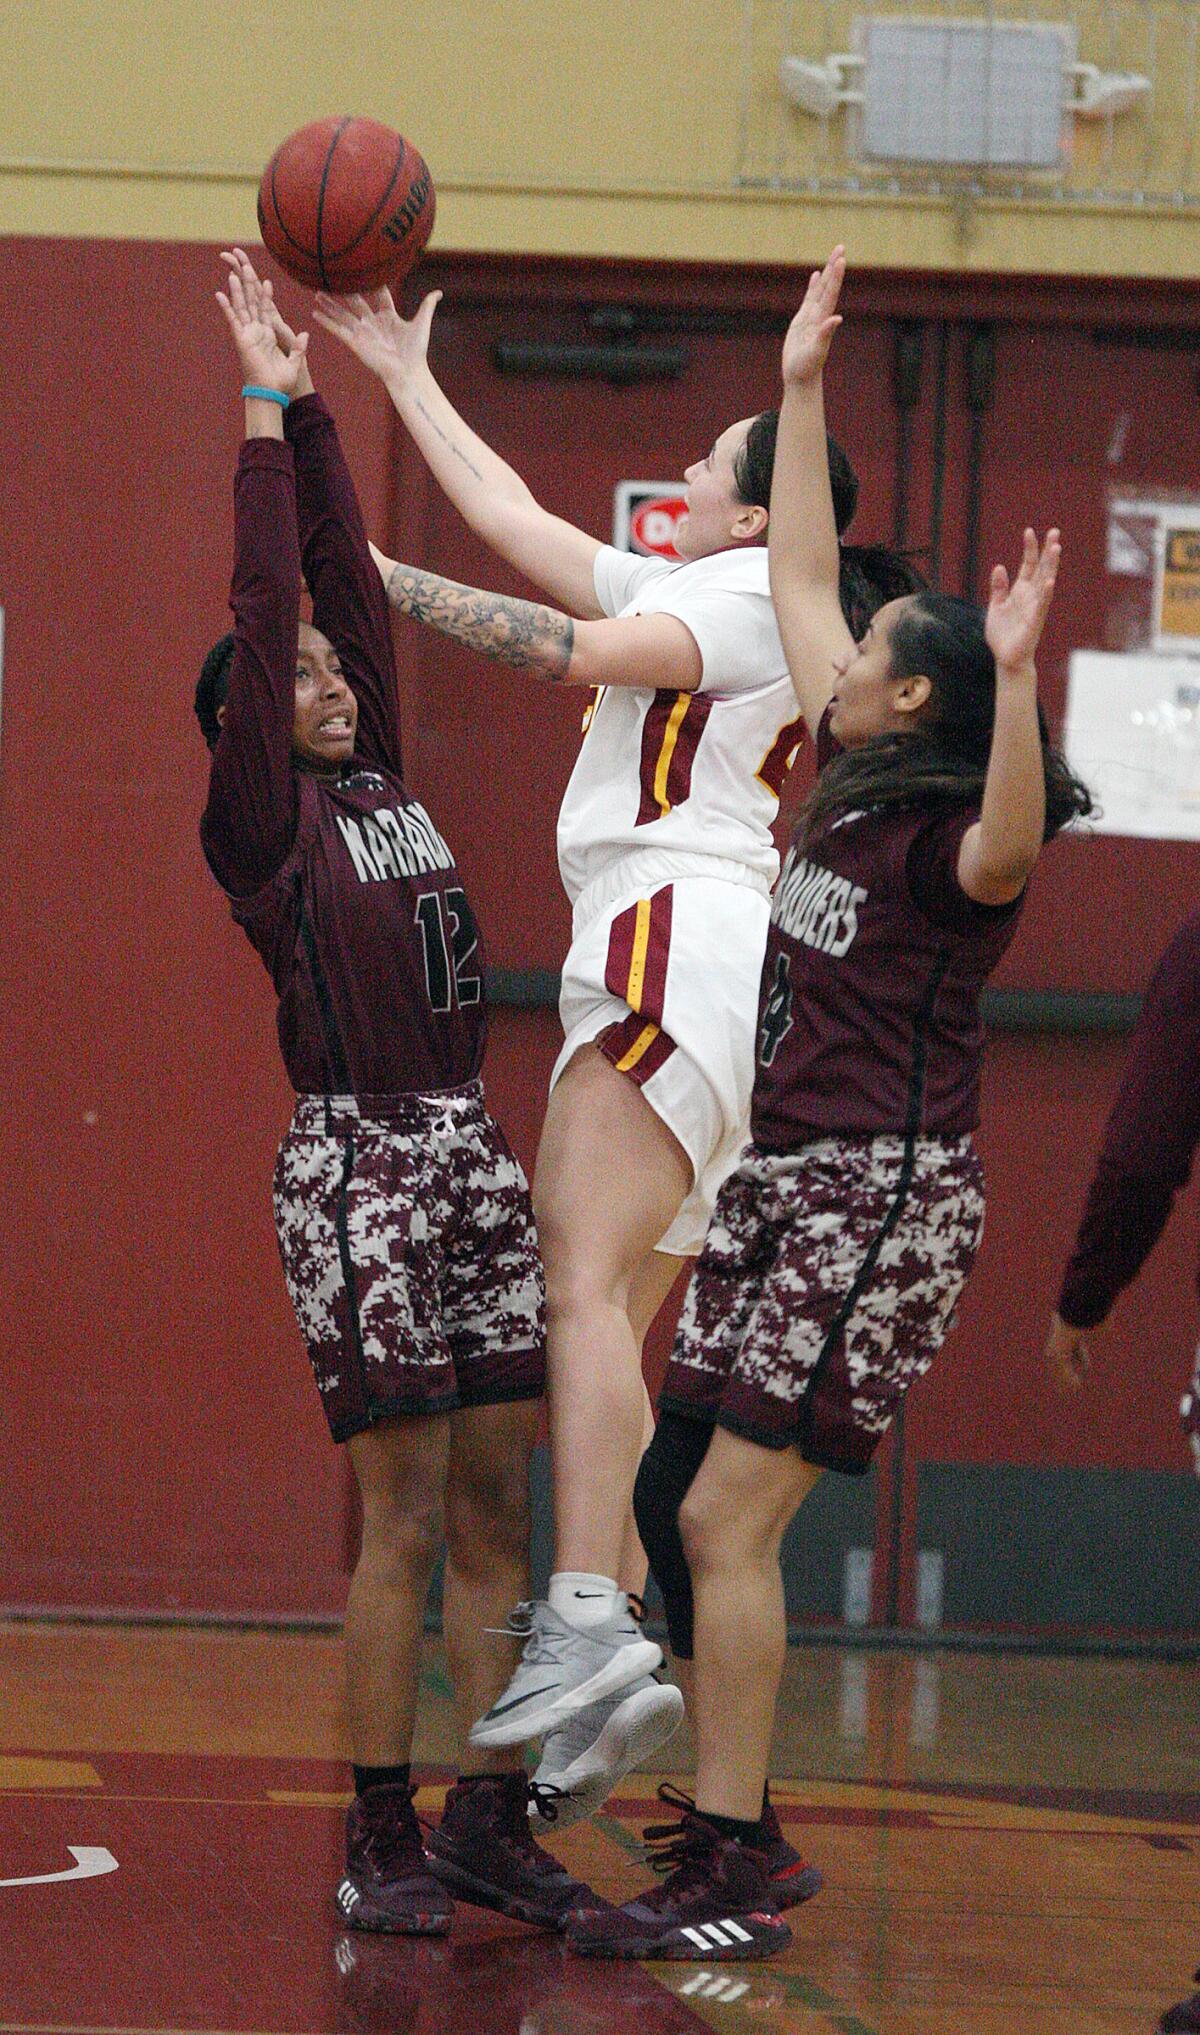 Glendale Community College's Jada Aldana jumps between Antelope Valley defenders Malaiya Patton and Sara Navarro in a Western State Conference women's basketball game at Glendale Community College on Wednesday, January 22, 2020.